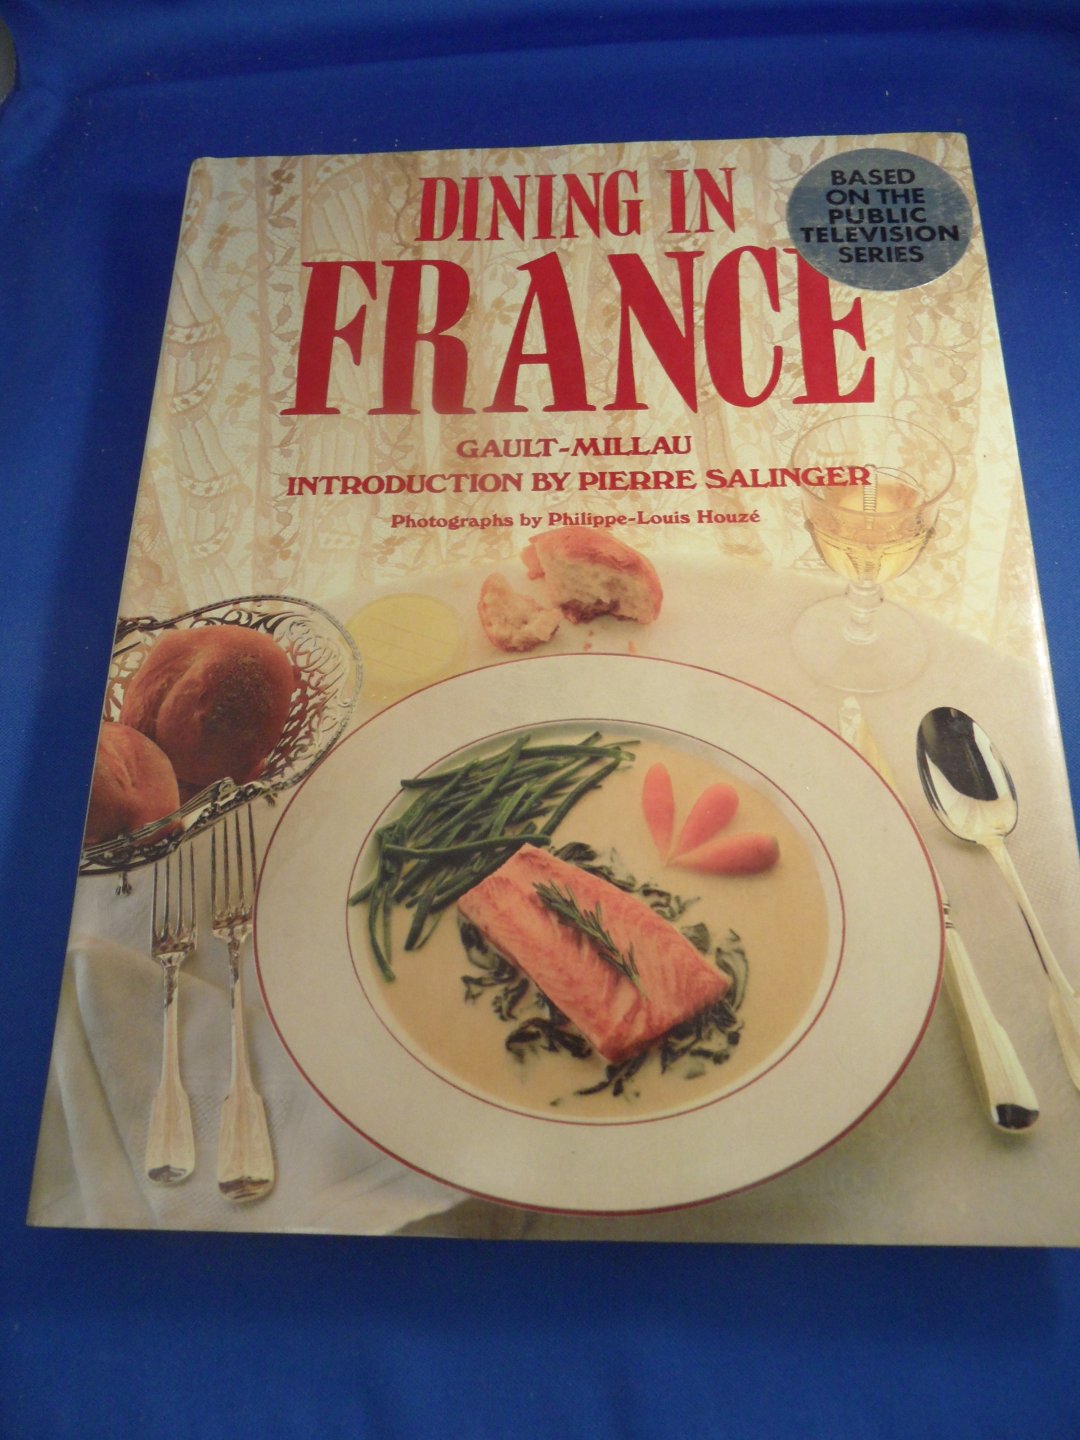 Millau, Christian - Dining in France (based on the public television series)